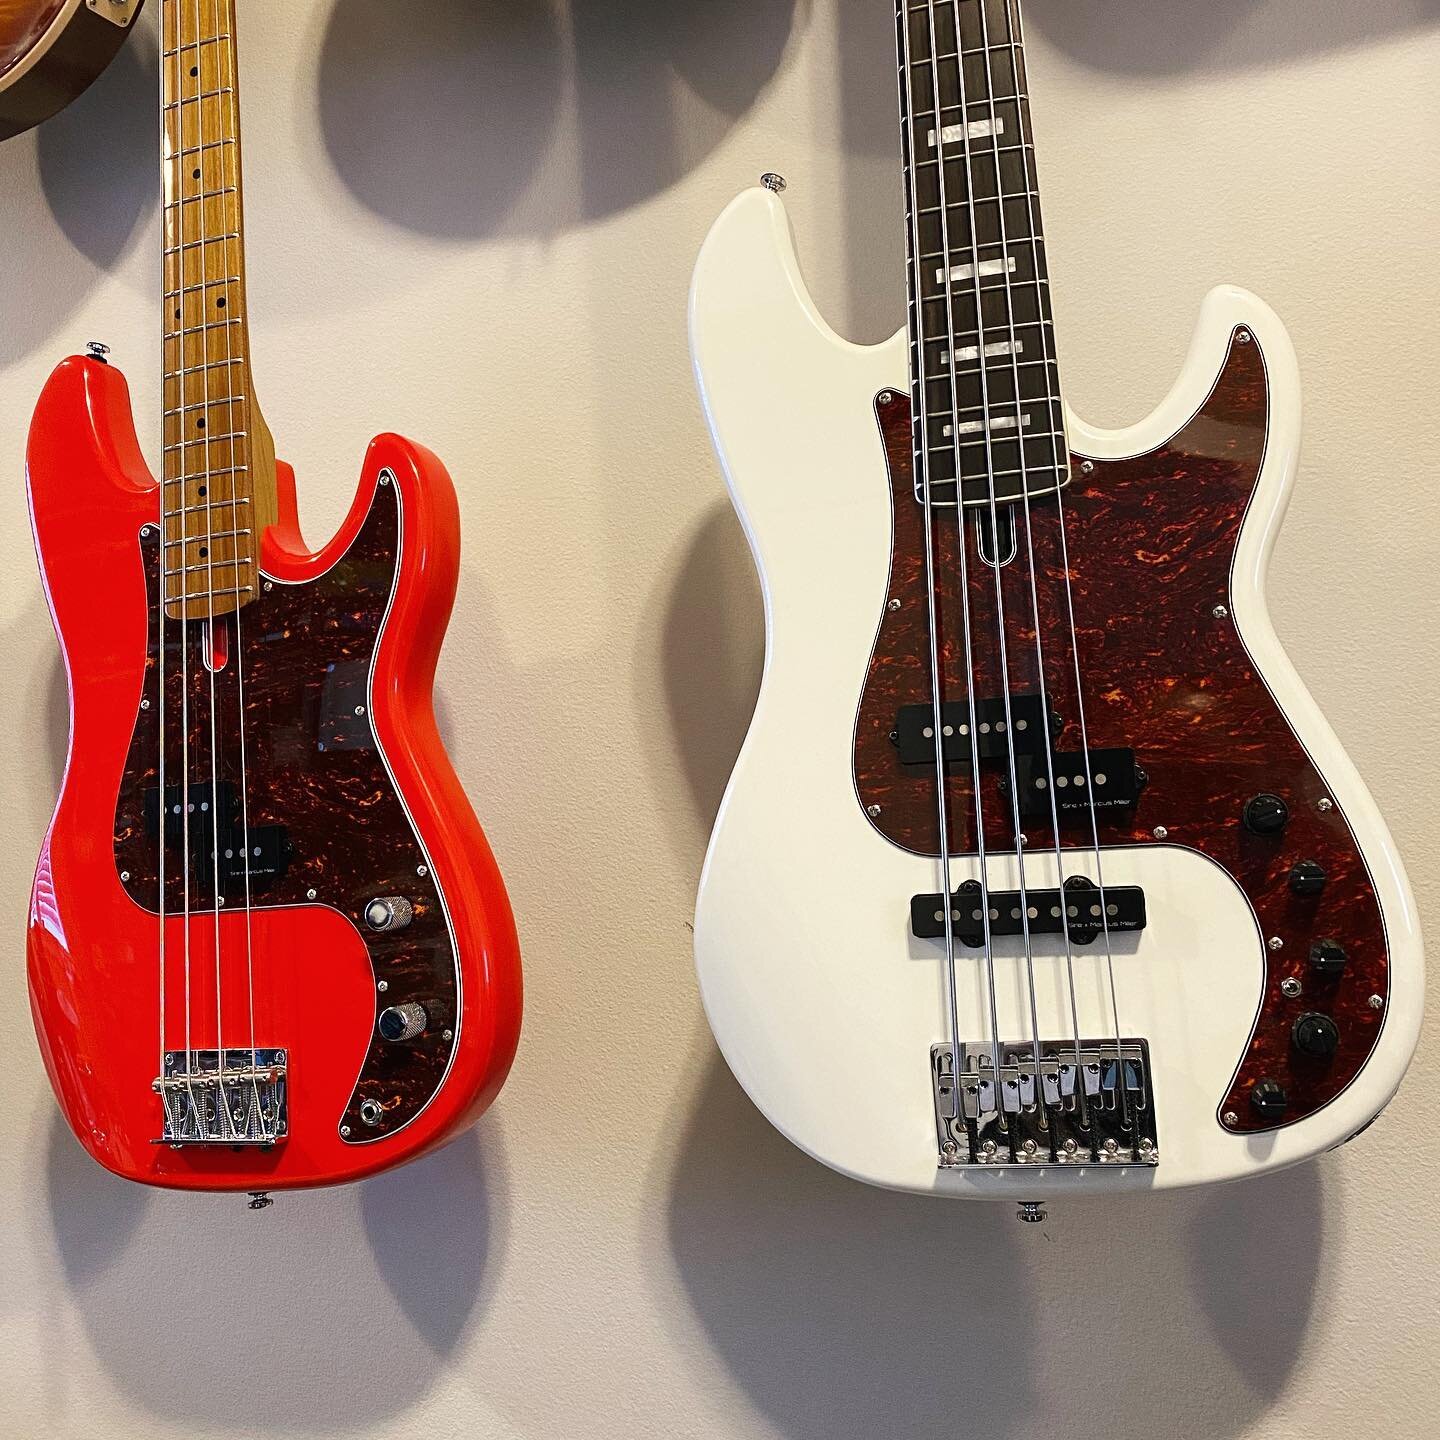 Would you want to see an A-B comparison video of these two basses? 
Sire P5 with roundwounds
Sire P7 5-string with flatwounds
.
.
.
.
.
#basses #sirebass #comparison #bassreview #bassguitar #bassist #bassplayer #bassplayers #bassplayersunited #sire #